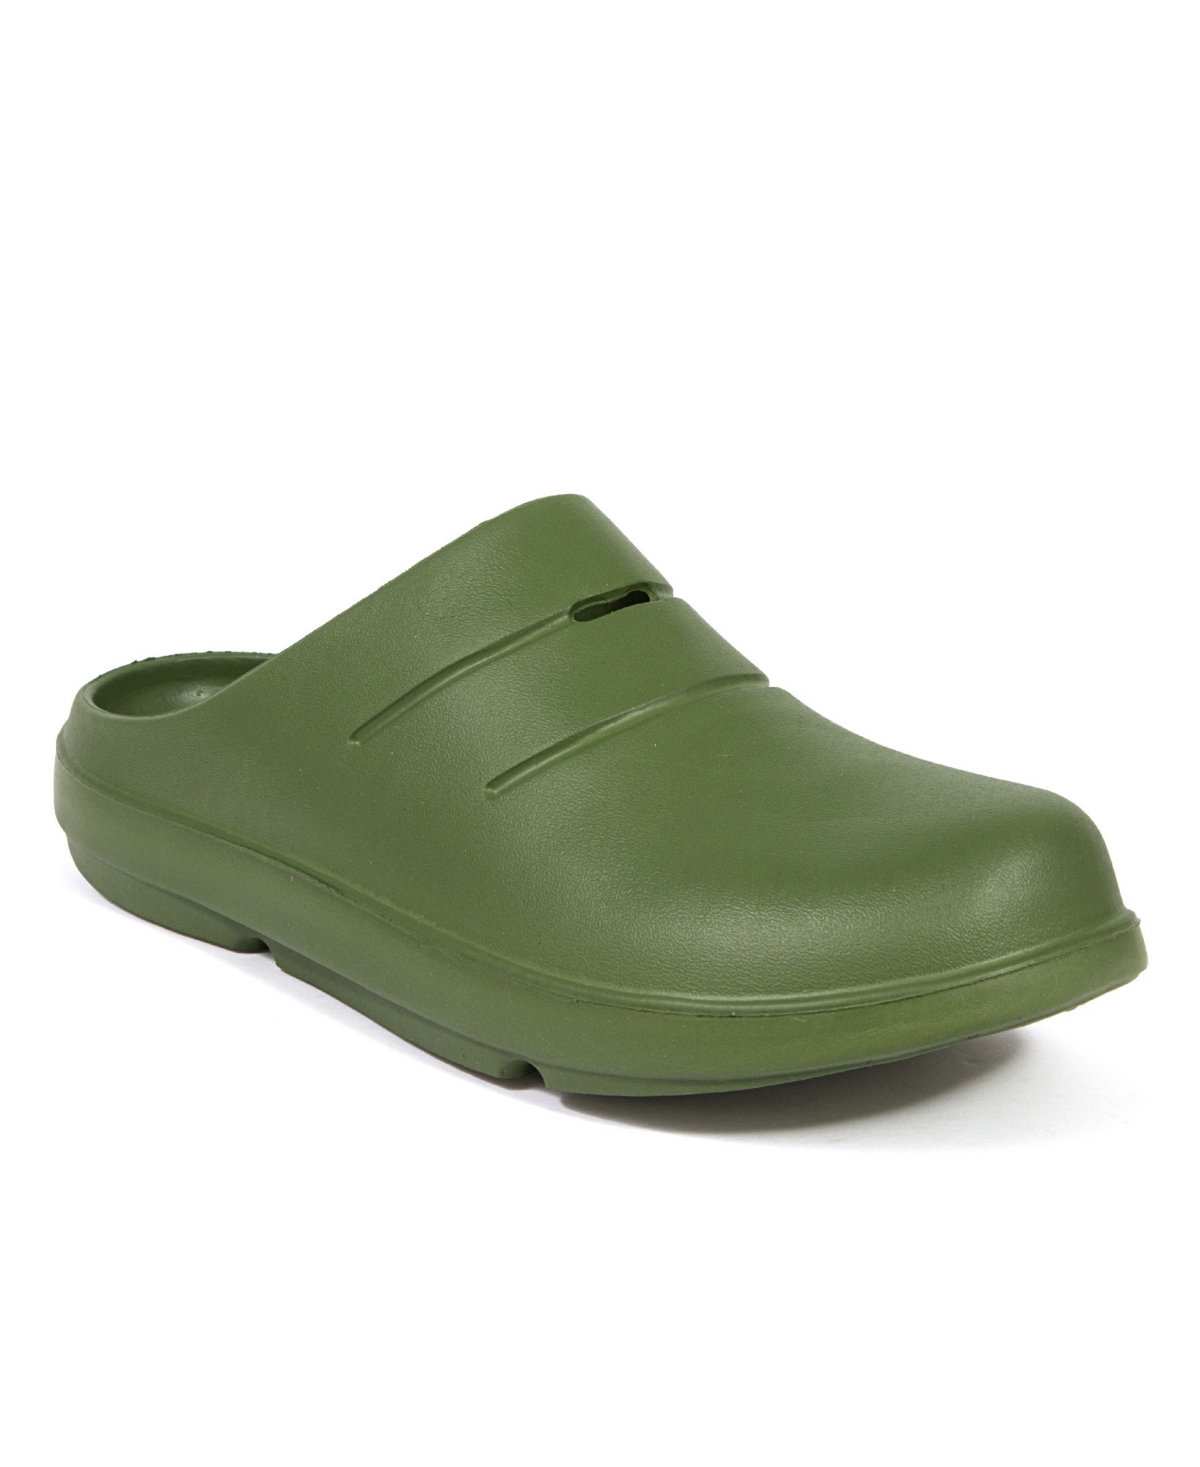 Men's Winston Comfort Cushioned Clogs Slippers - Sage